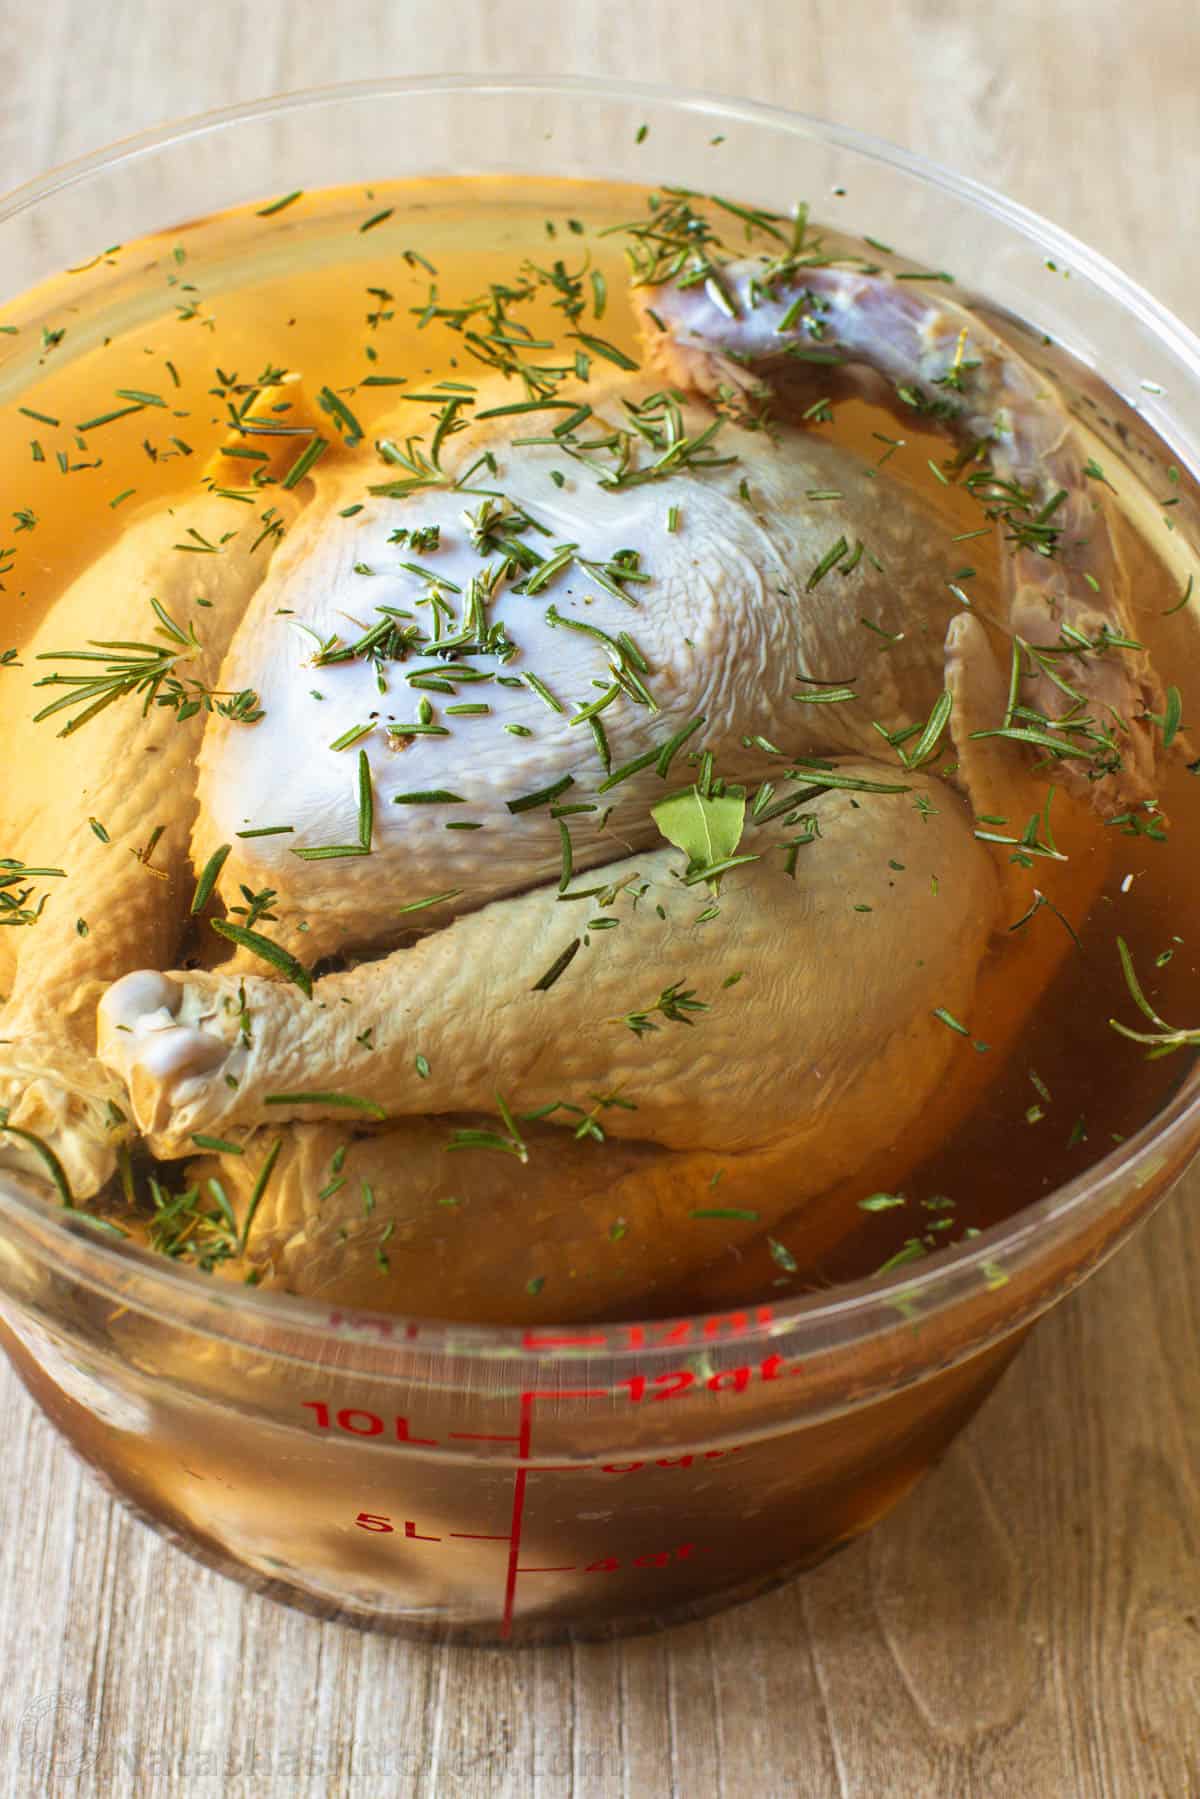 A whole turkey soaking brine with herbs sprinkled on top